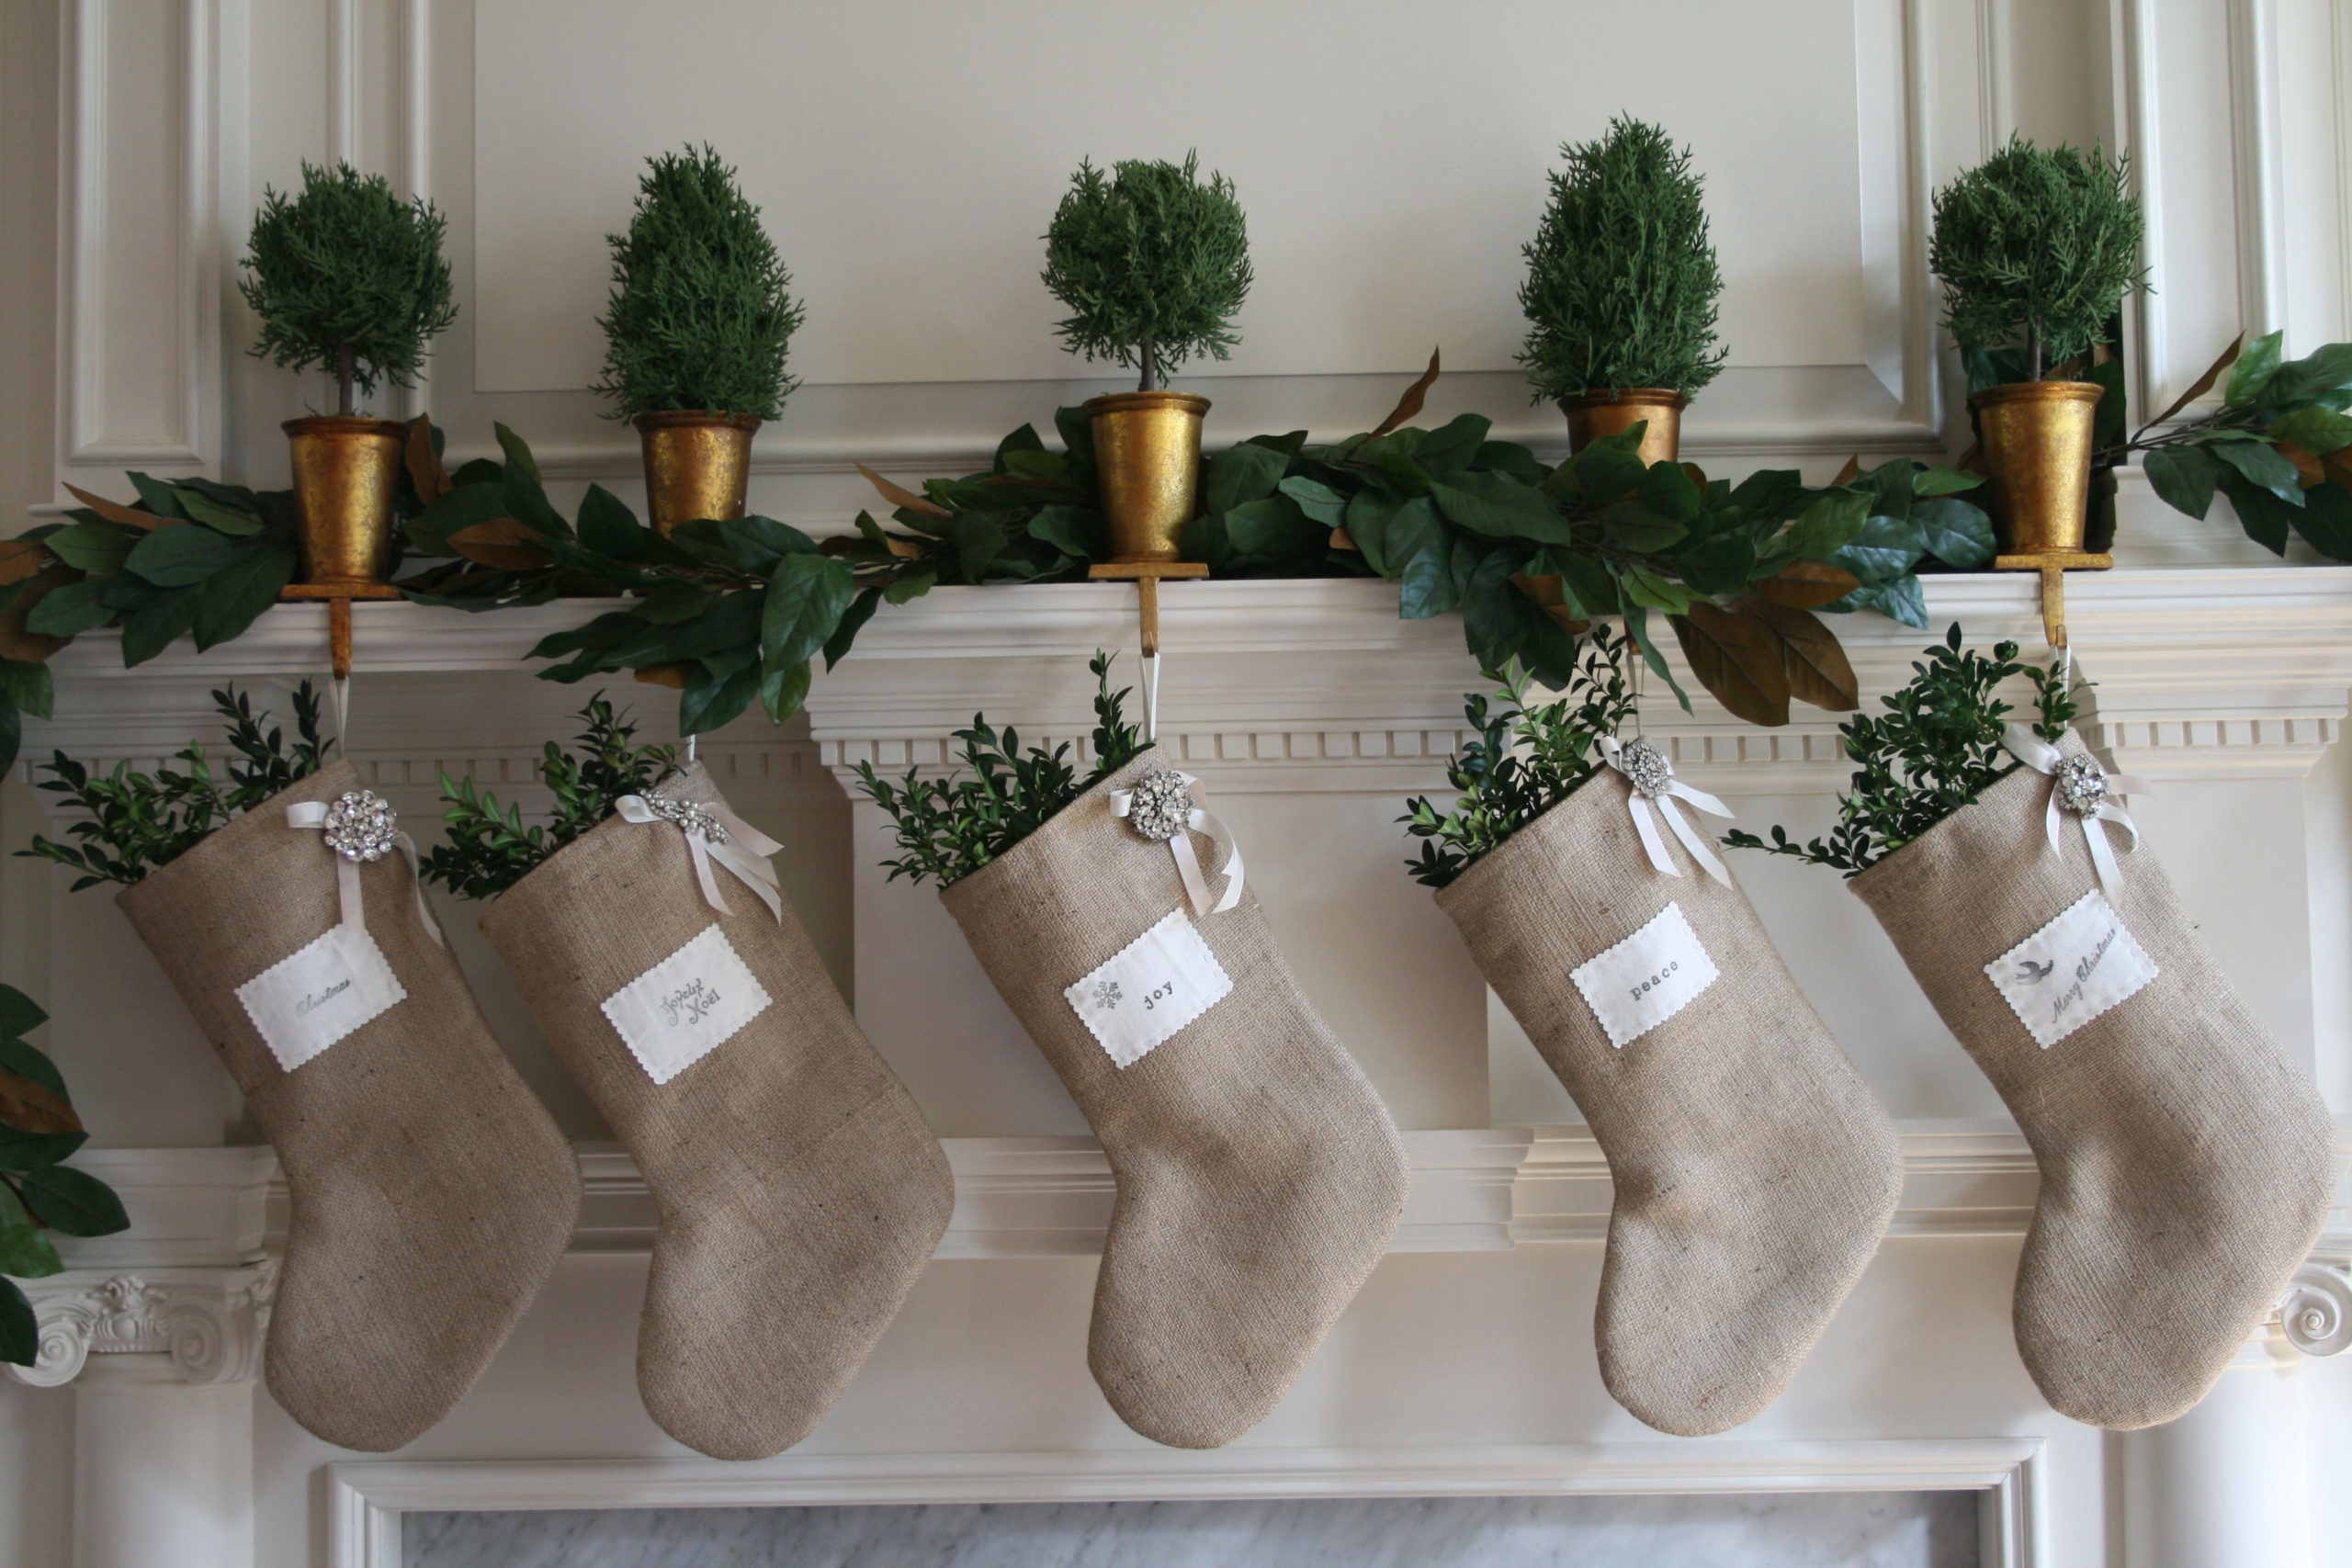 9 DIY Christmas Ideas Of Decorating With Burlap